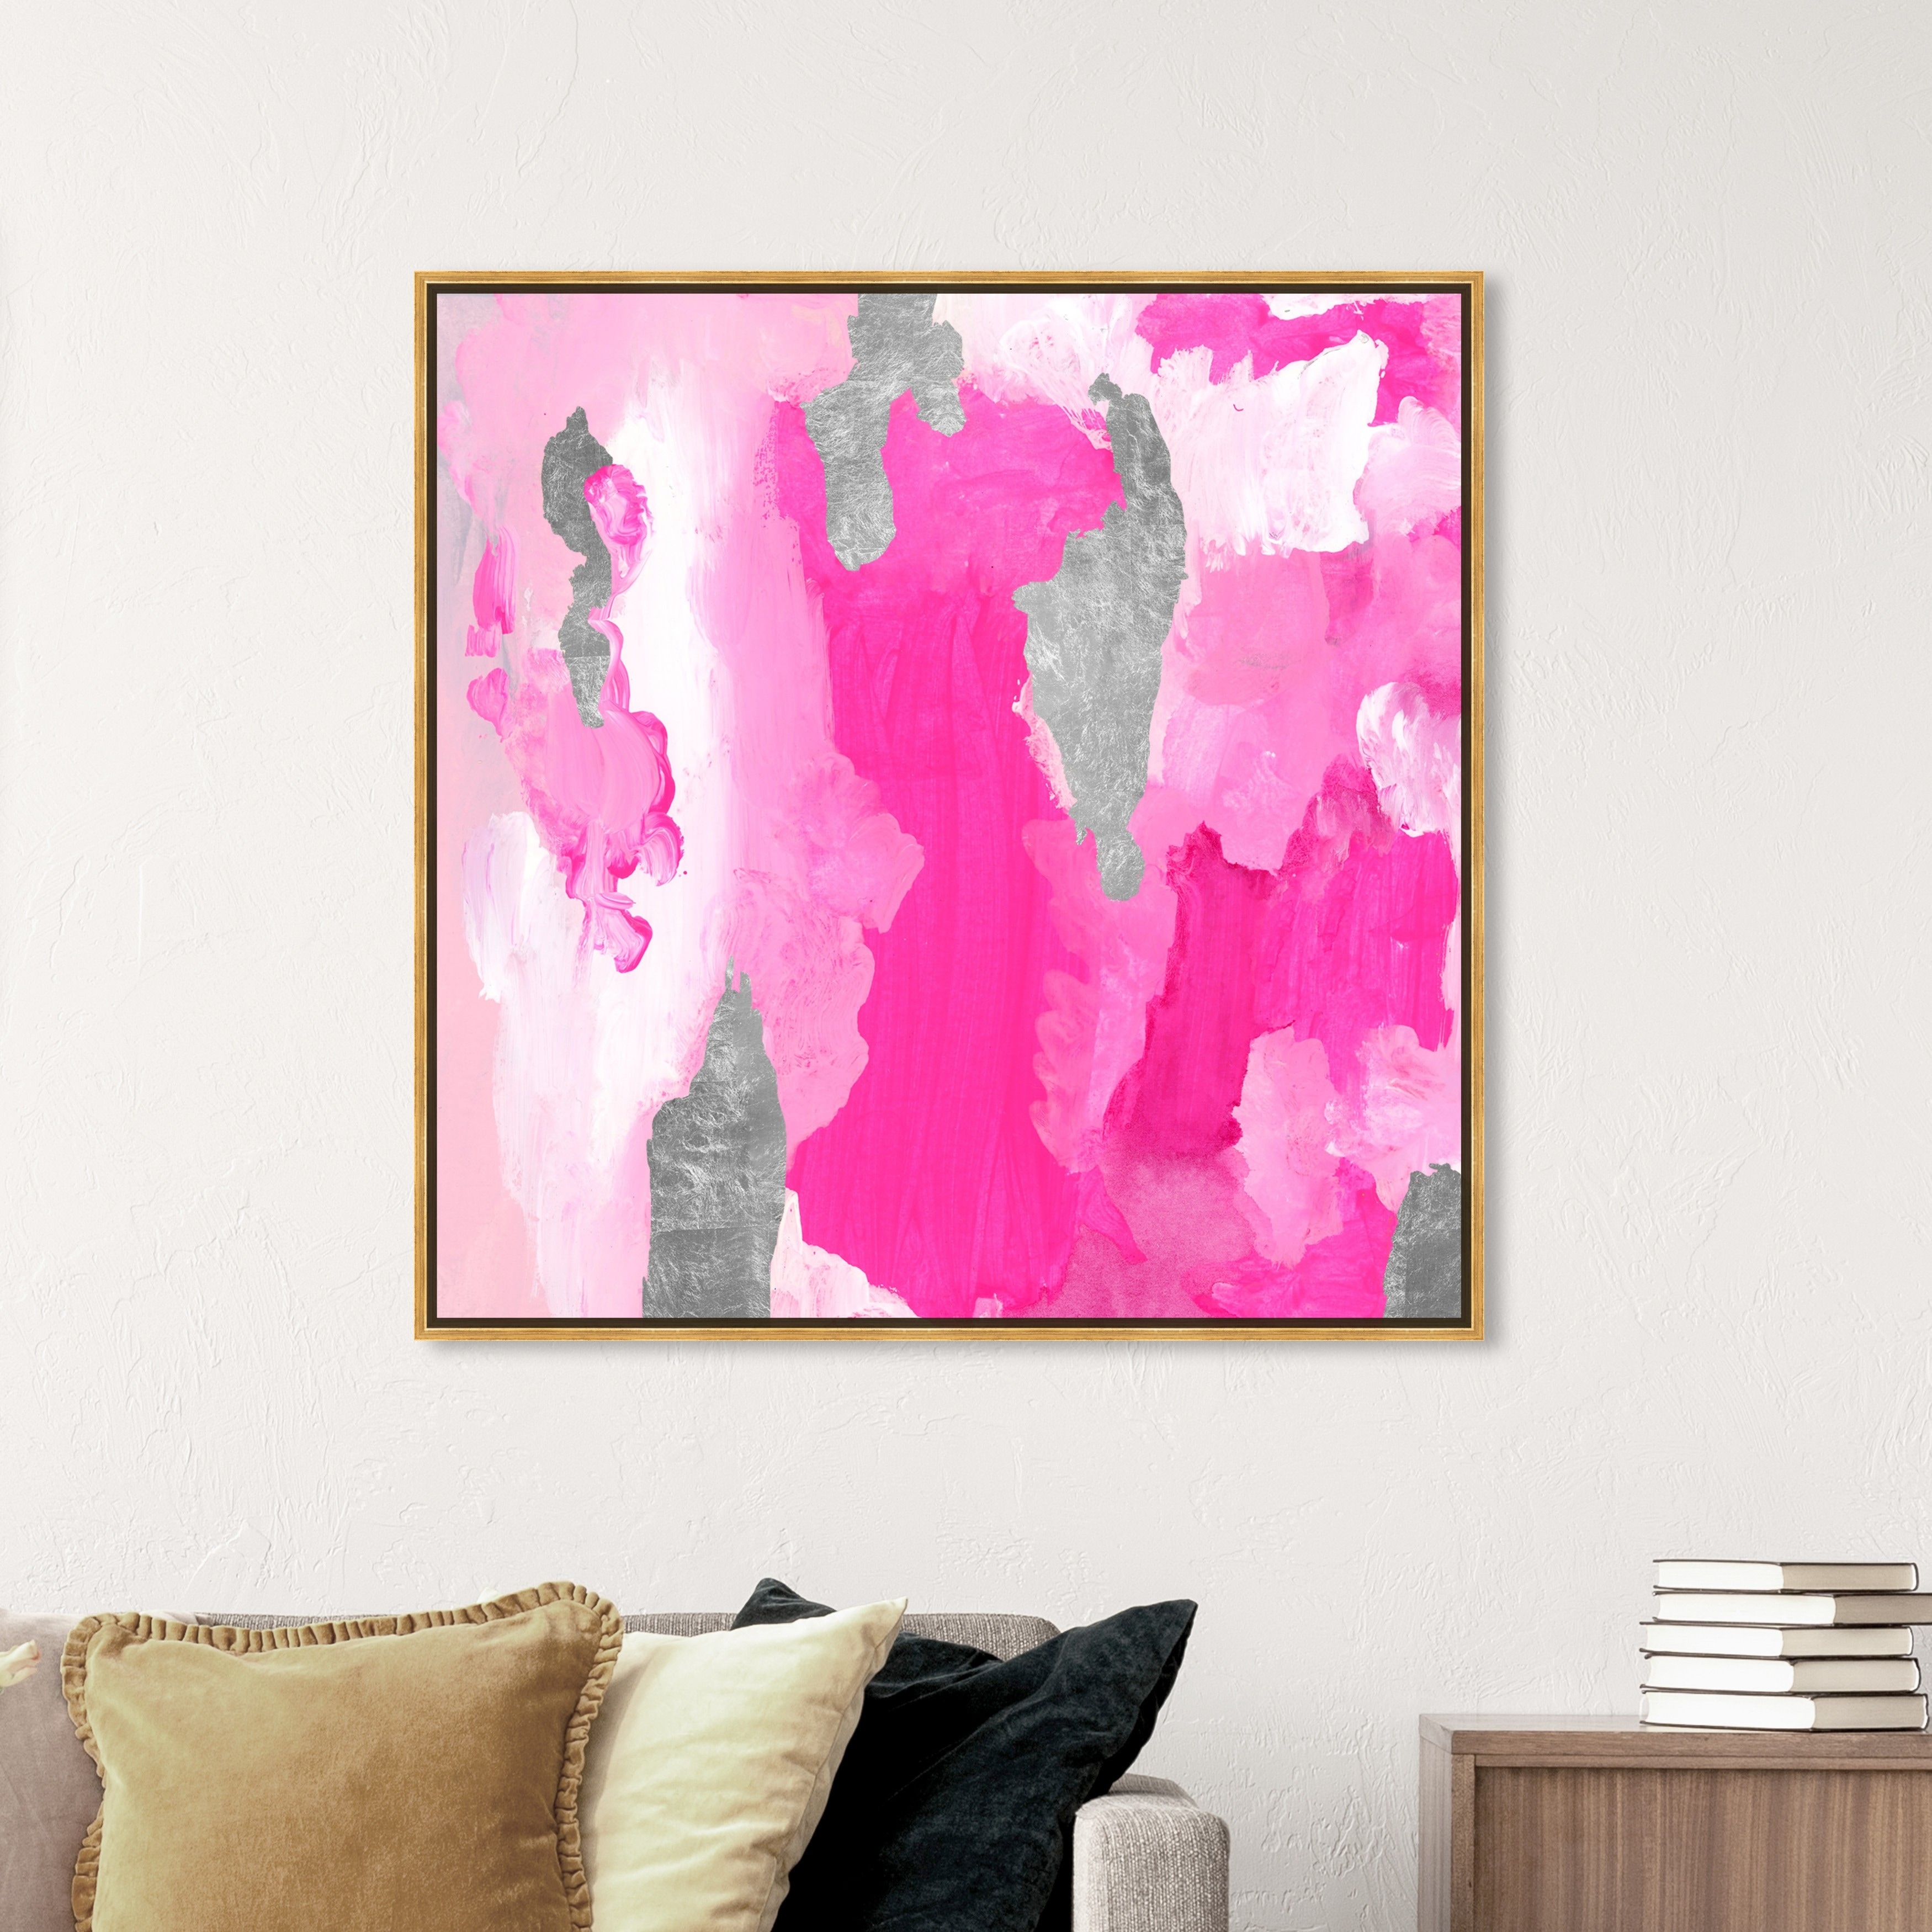 Oliver Gal 'Pink Silver Sky' Abstract Wall Art Framed Canvas Print